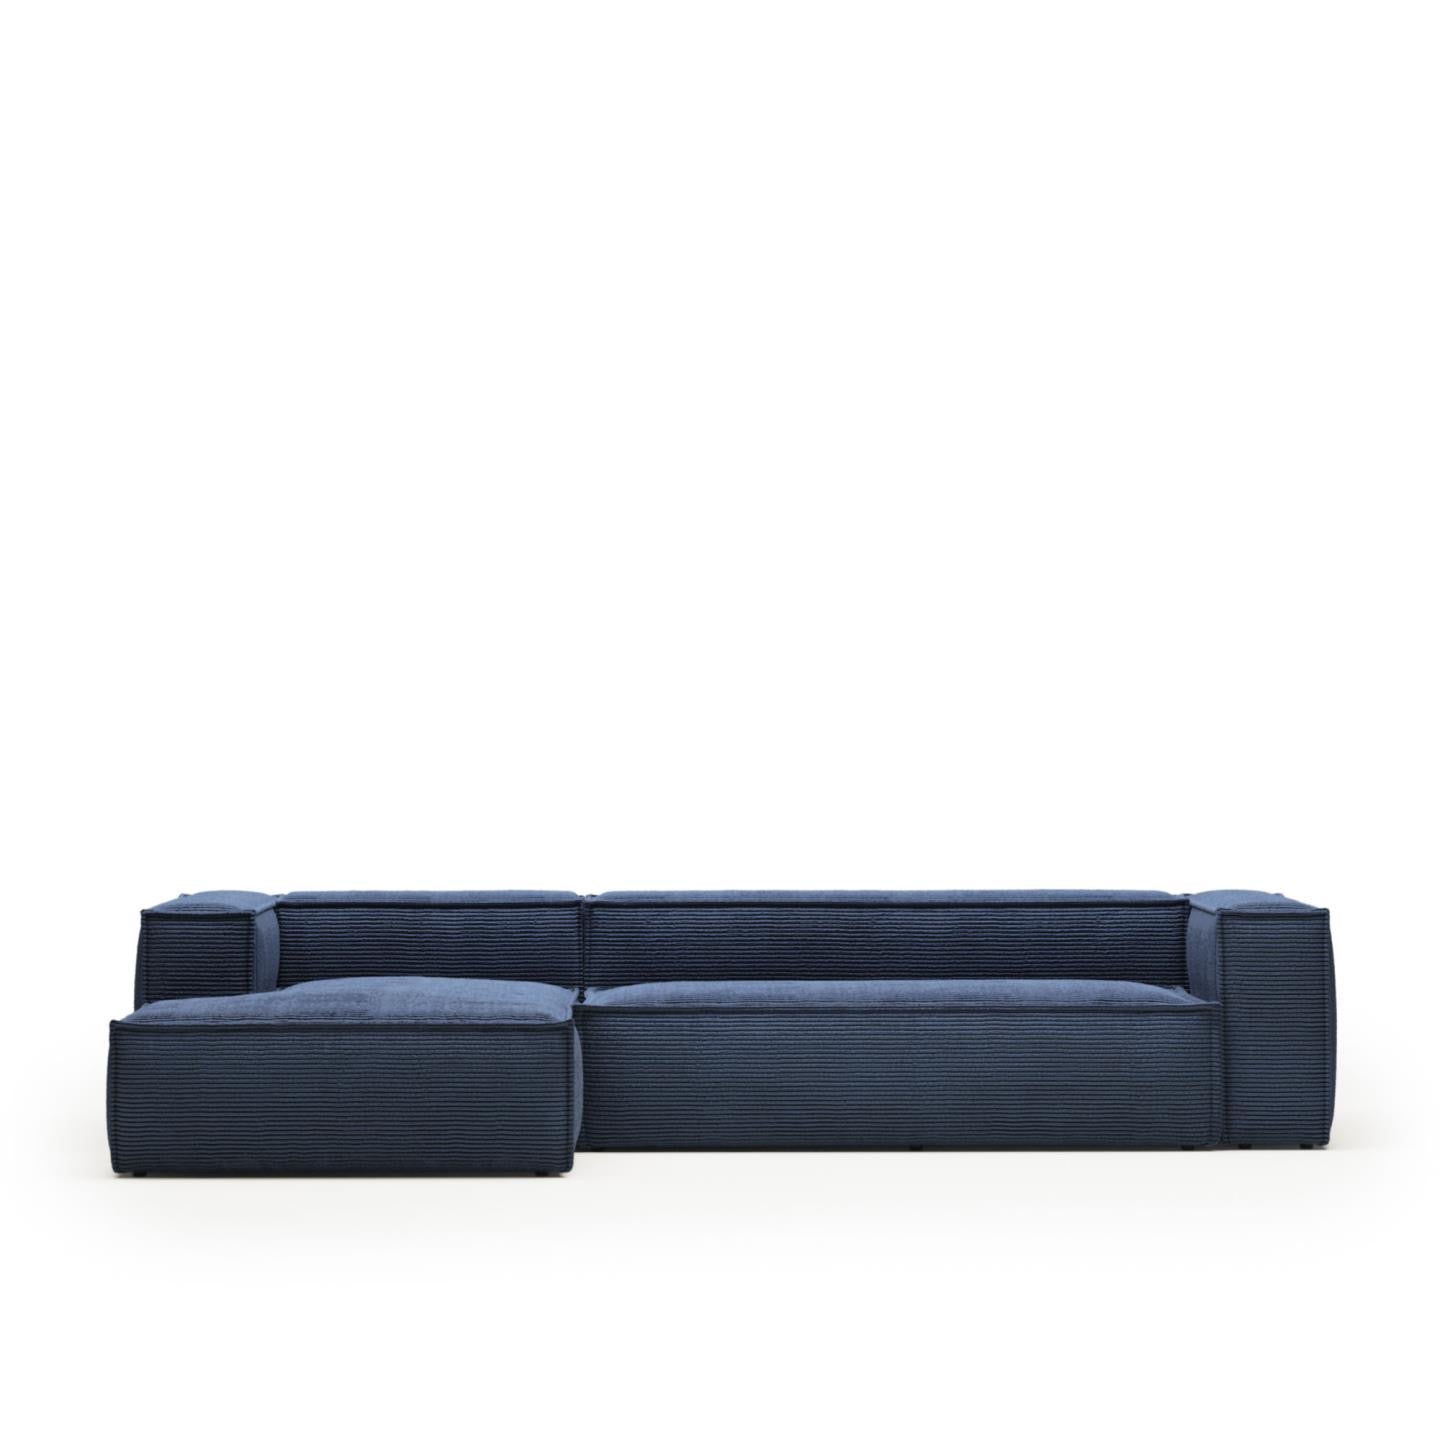 Lund 4 Seater Sofa with Left Side Chaise - Blue Corduroy